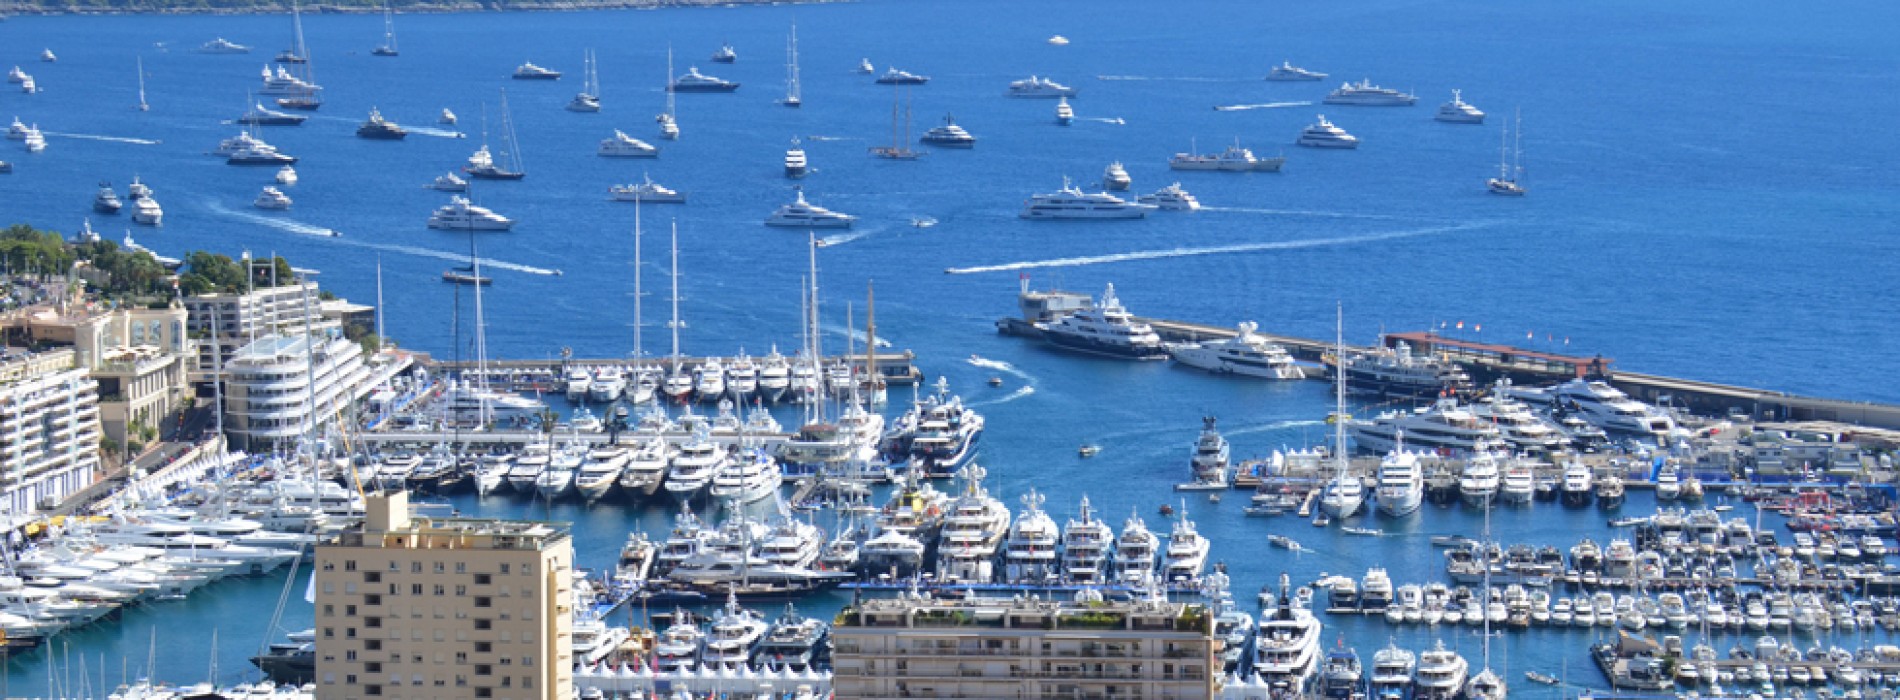 Monaco Yacht Show 2017 from 27 to 30 September 2017